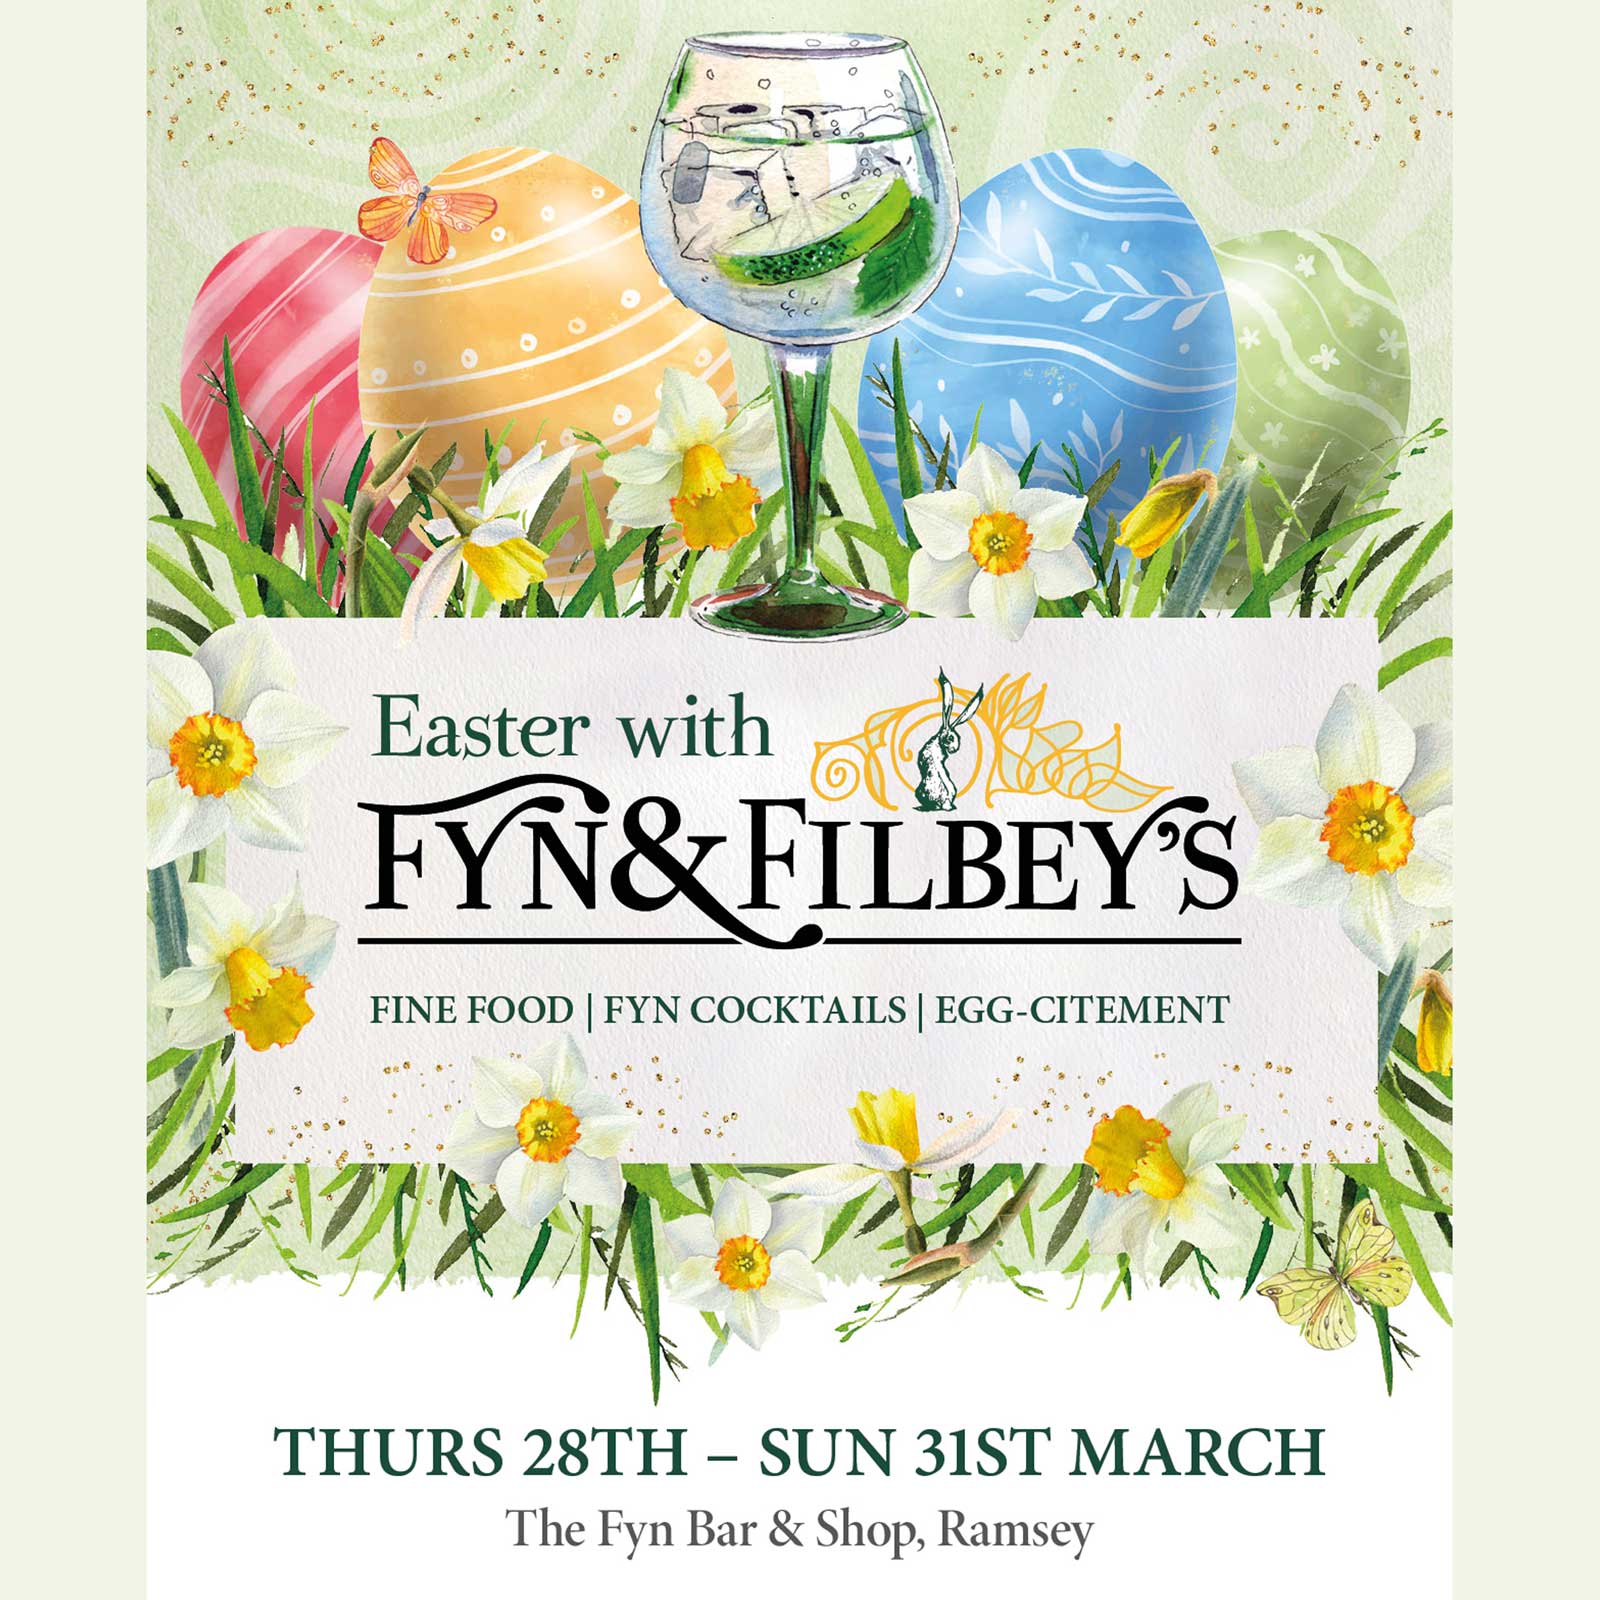 EASTER with Fyn & Filbey’s - THURSDAY 28TH – SUN 31ST MARCH